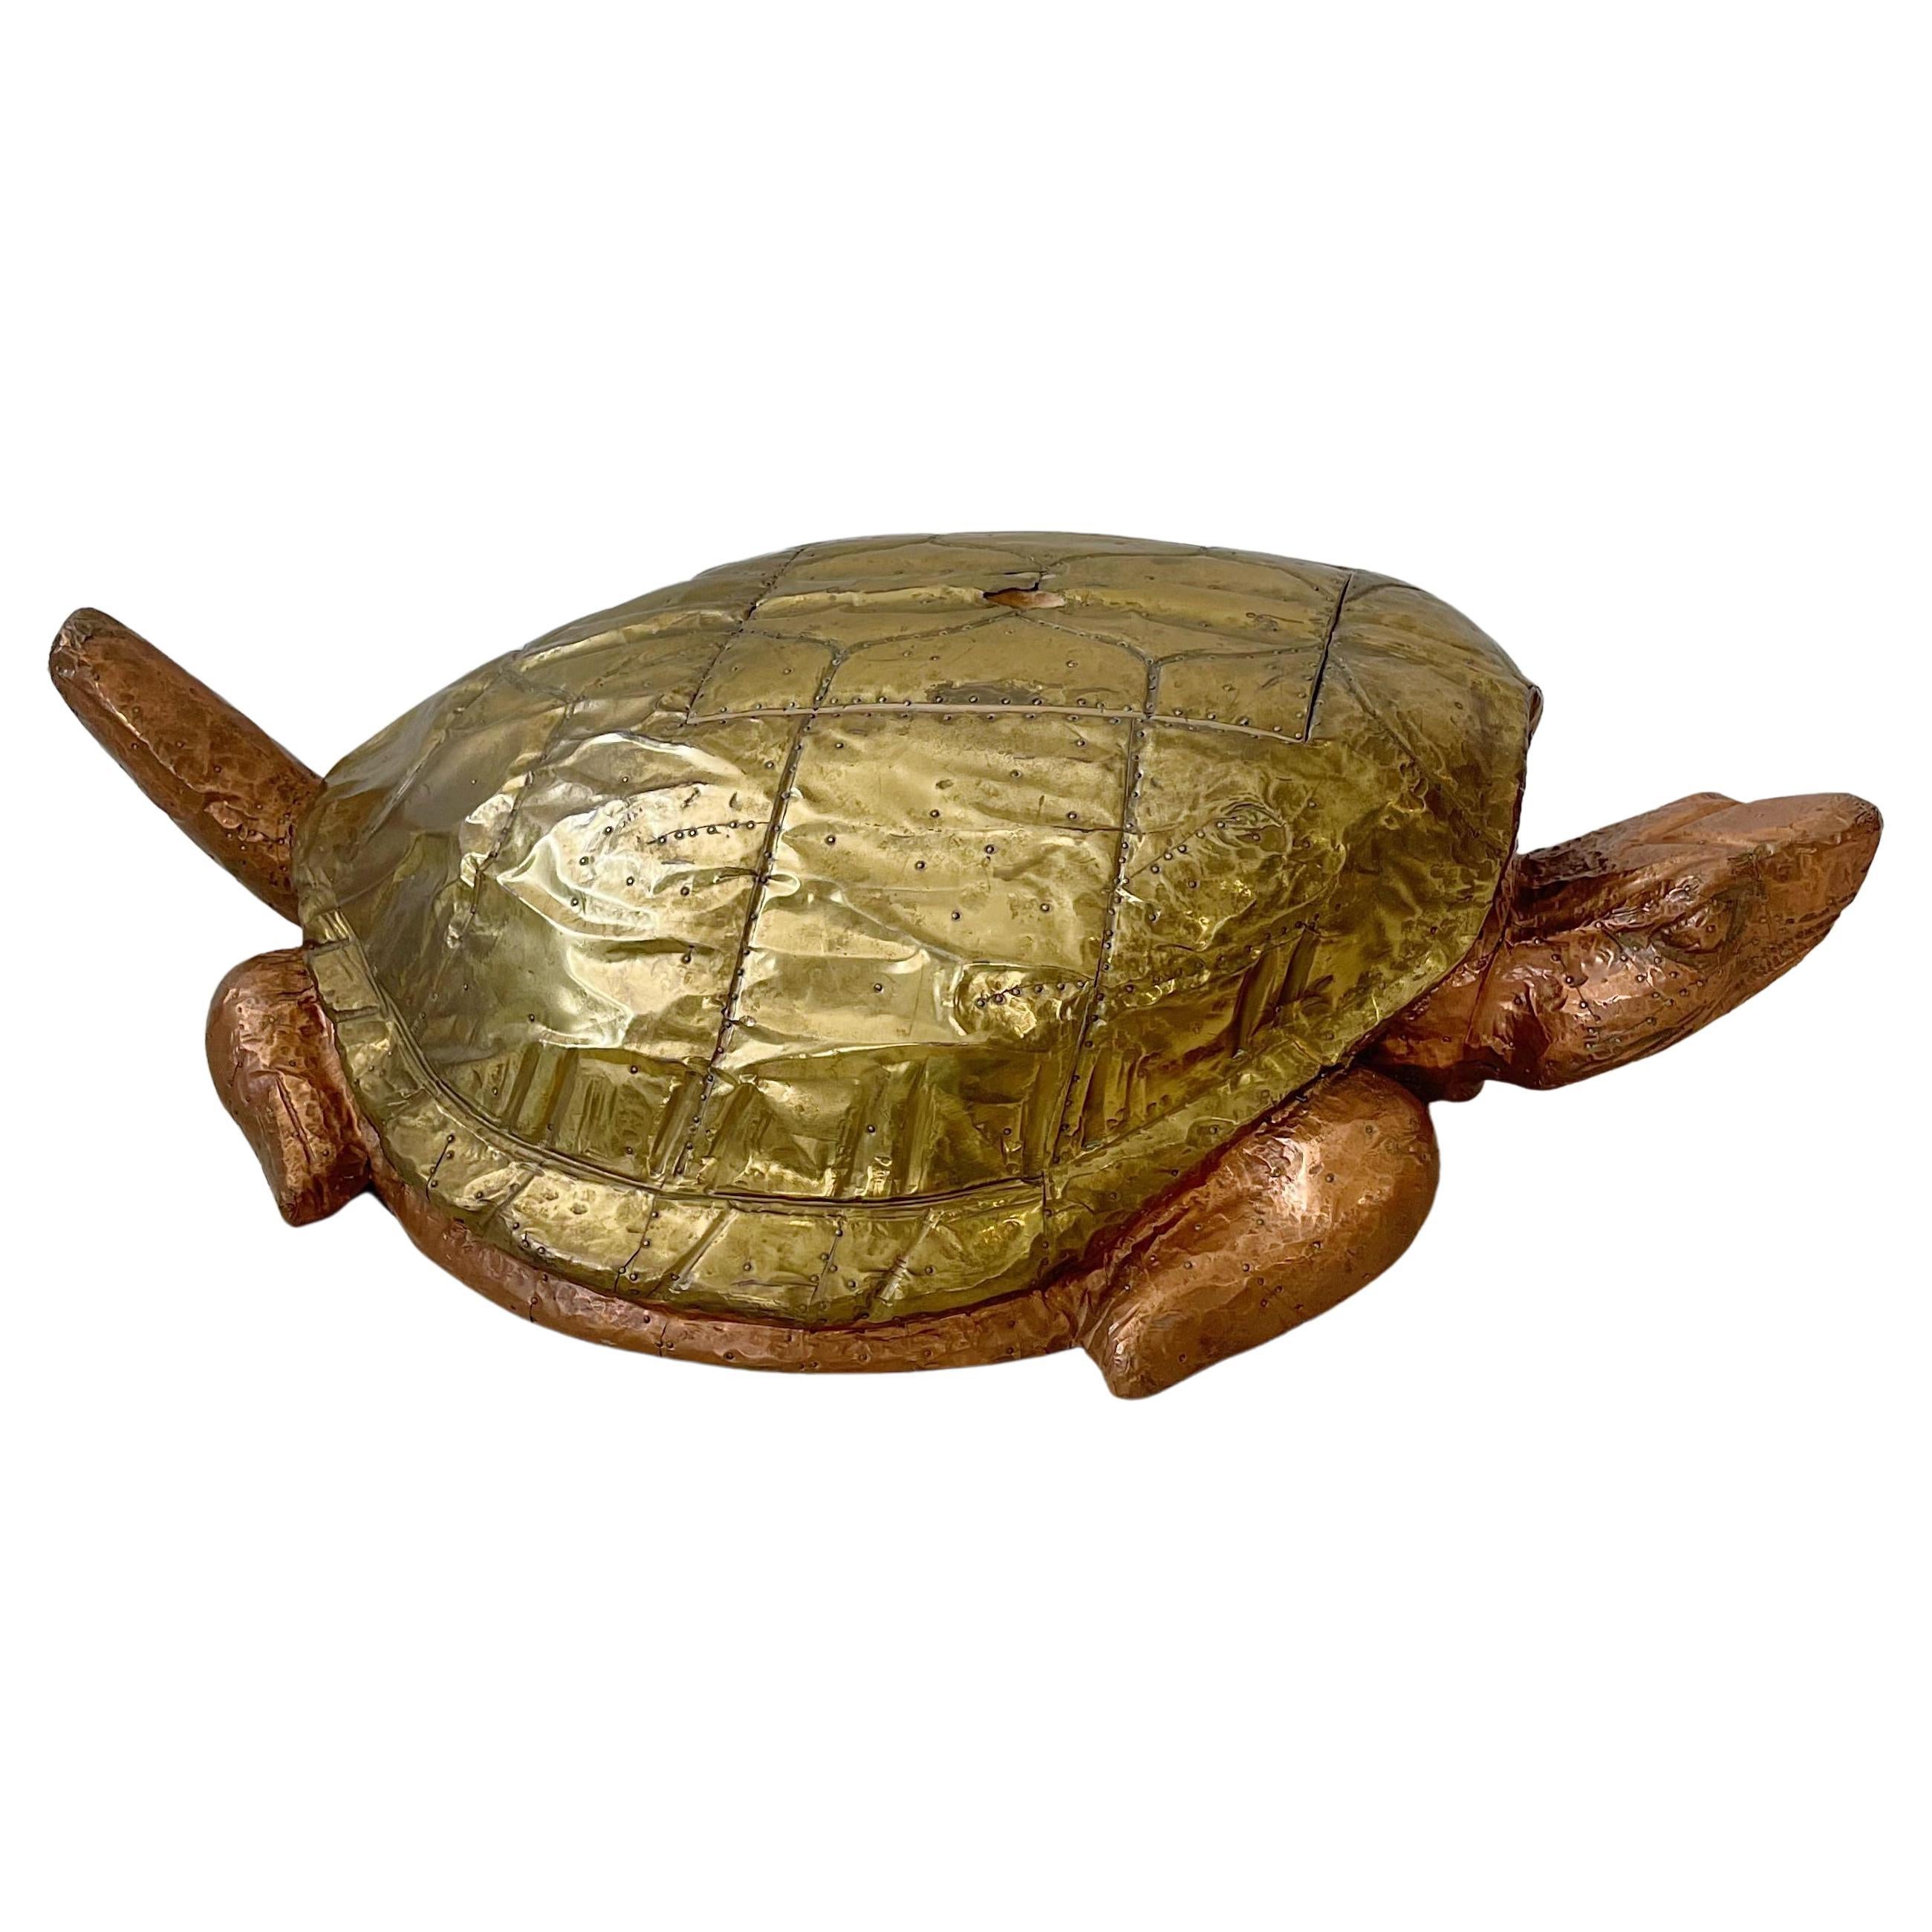 Arthur Court Copper and Brass Clad Lifesize Turtle Box